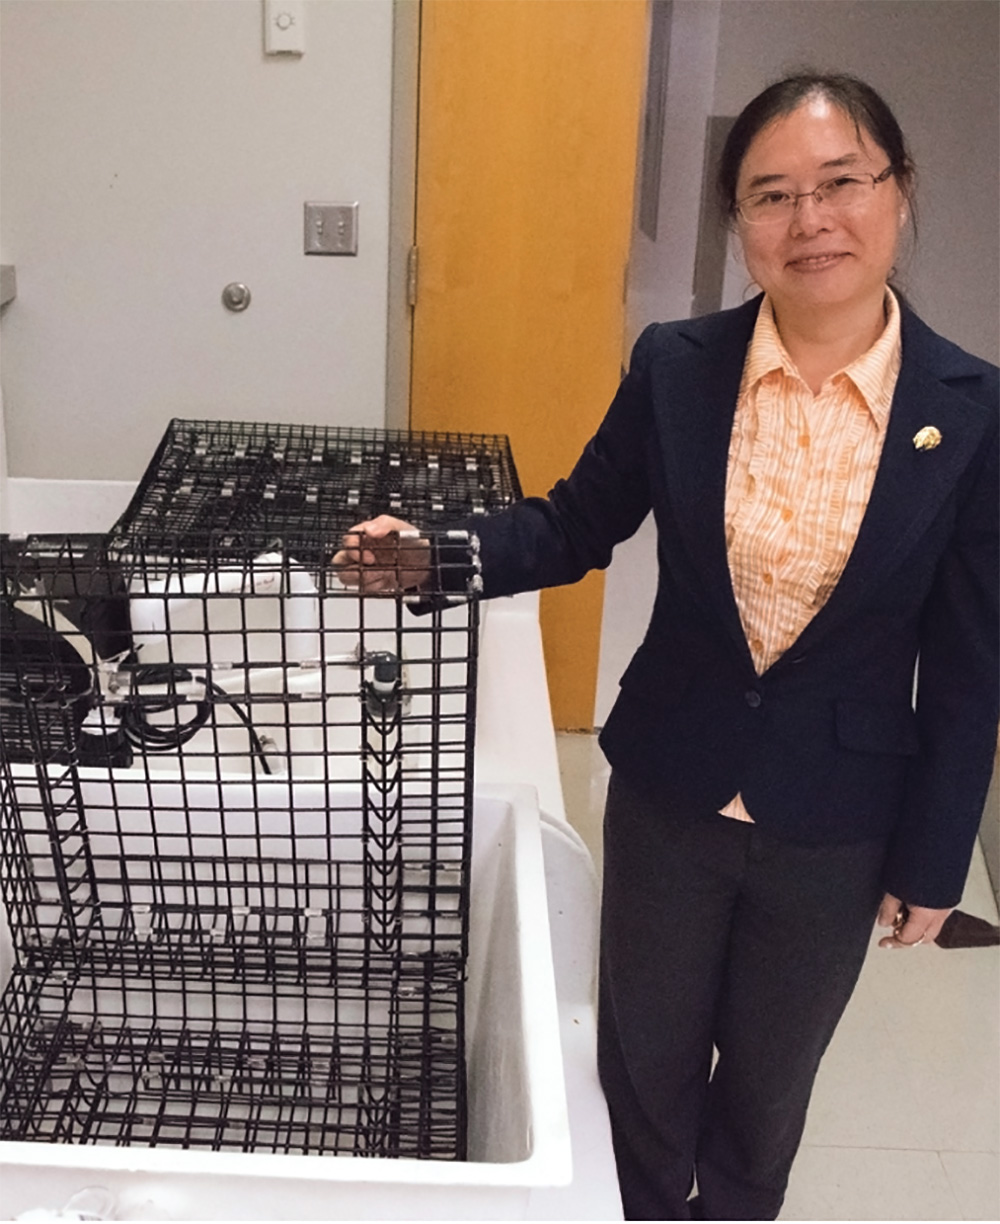 Maryland Sea Grant Extension Agent Cathy Liu with a wet storage system used to control vibrio. Photo, Daniel Pendick / MDSG